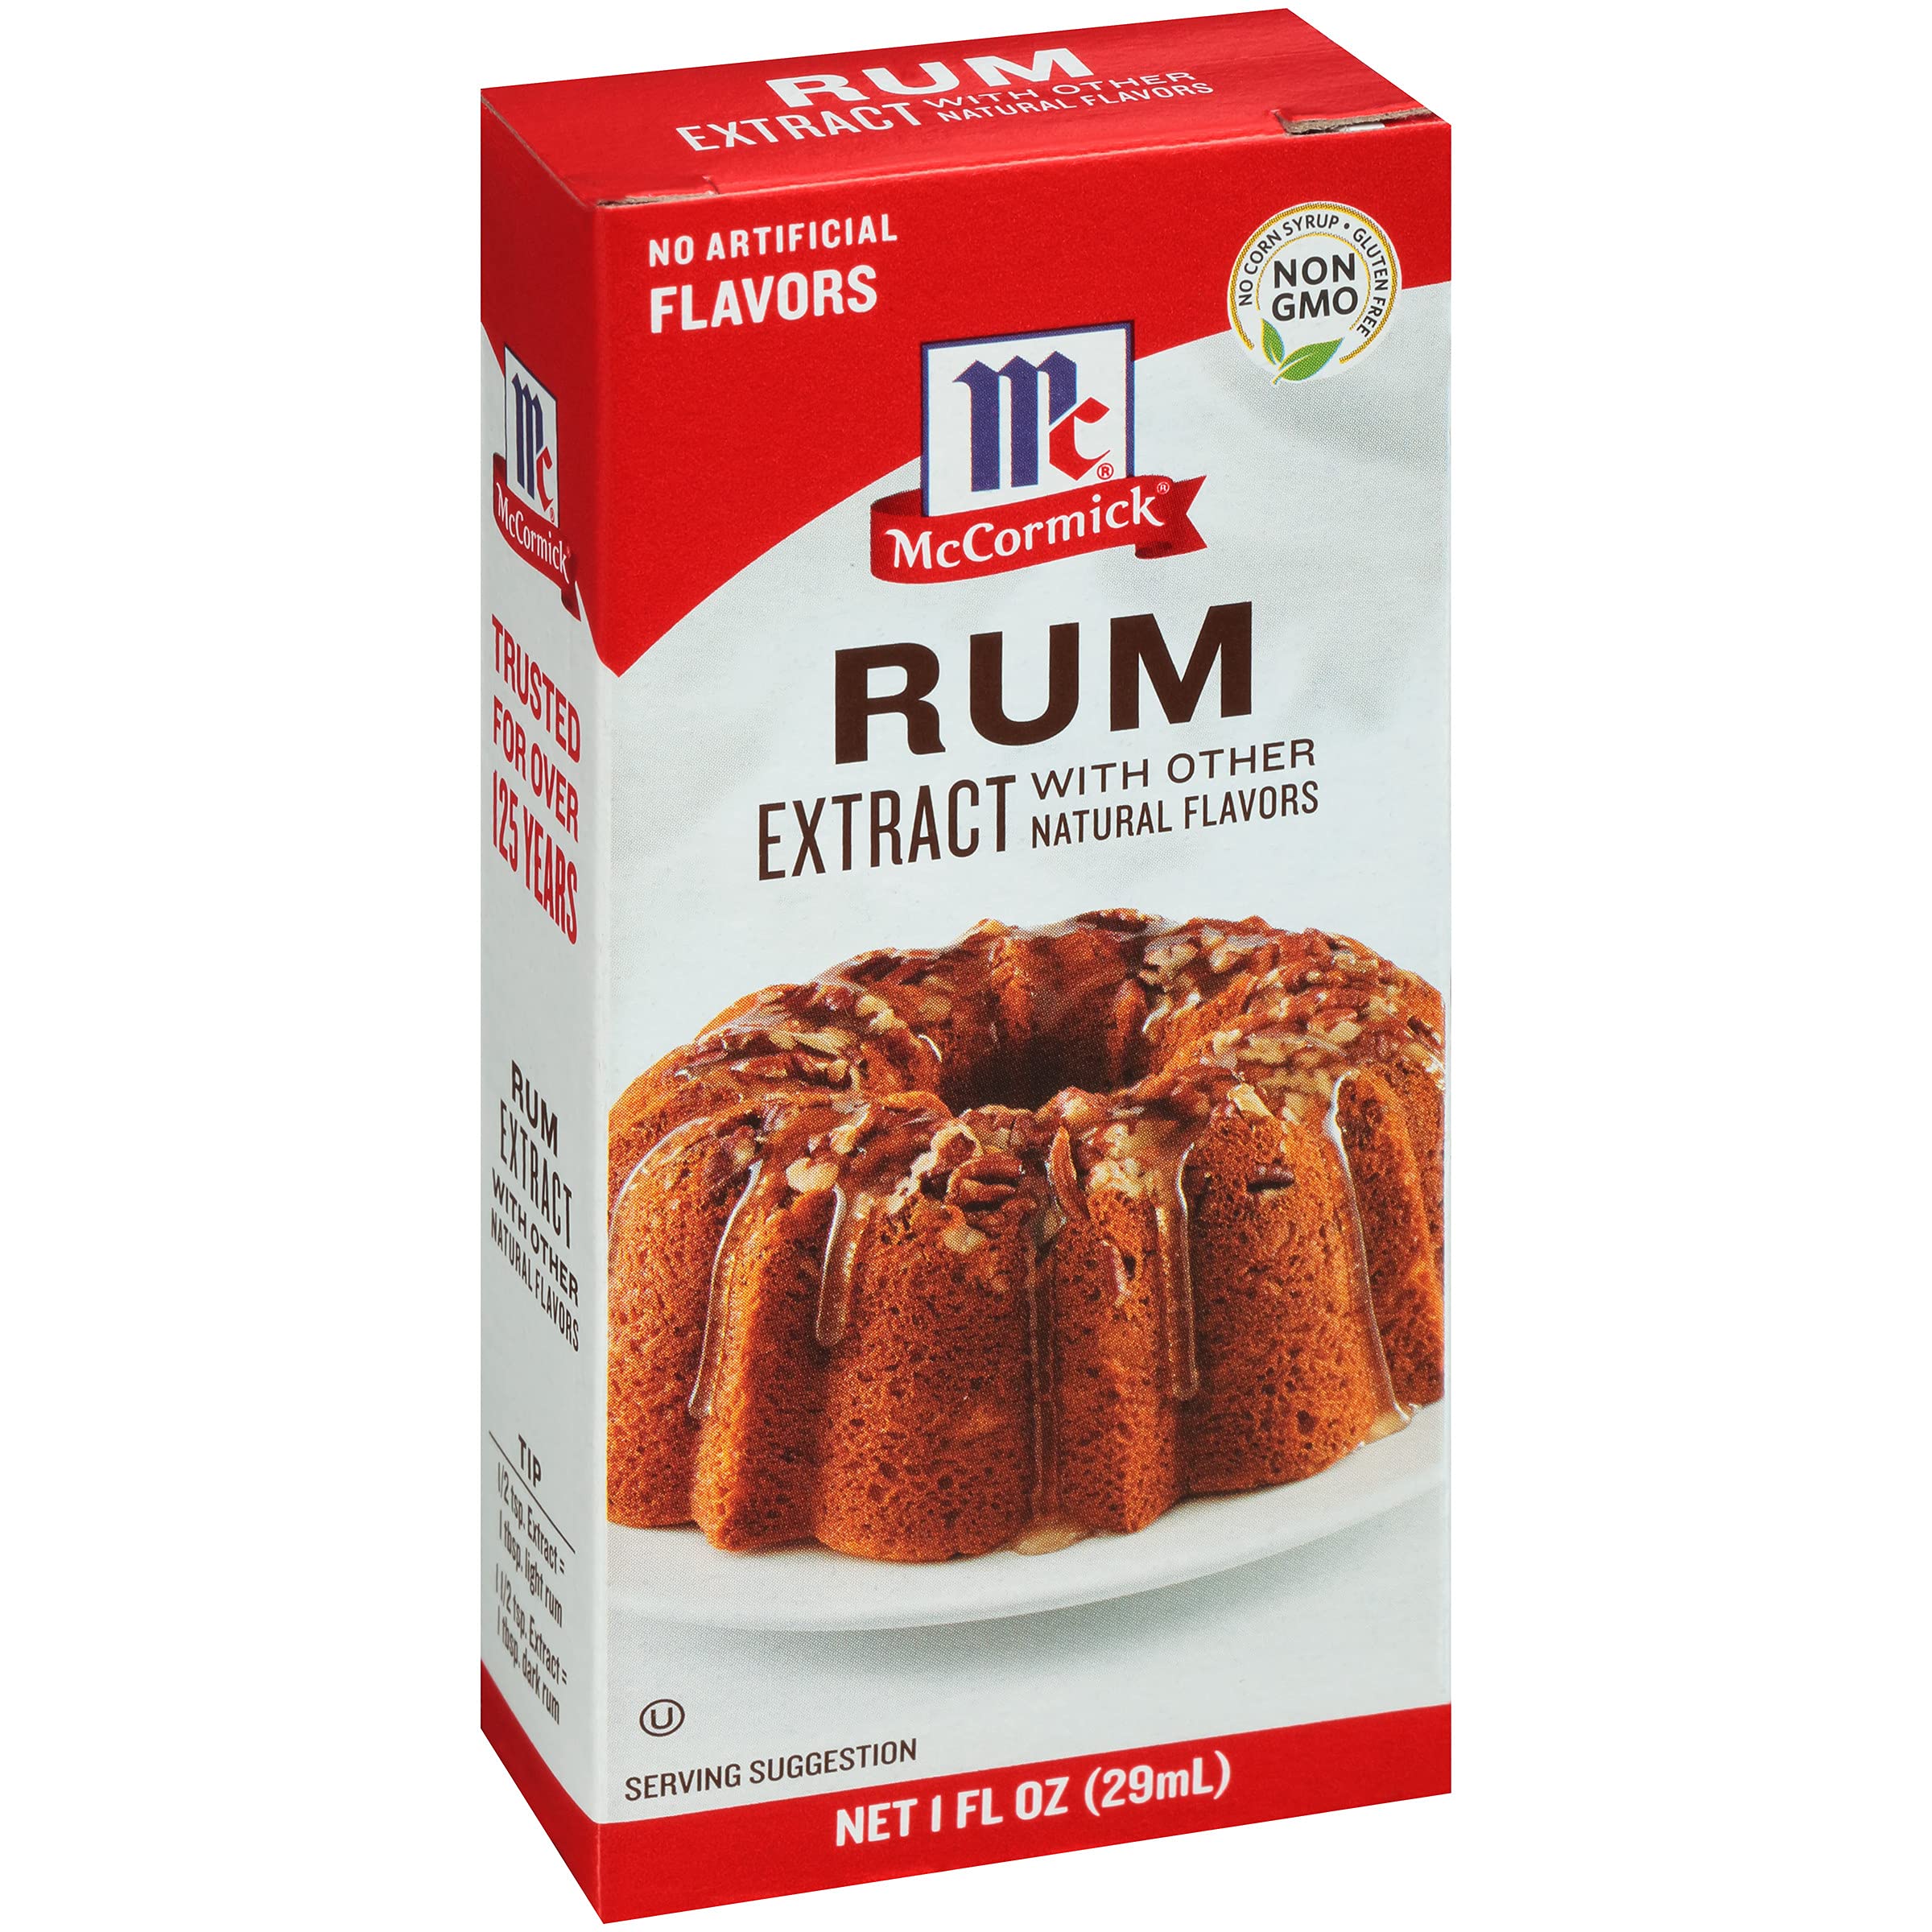 Mccormick Rum Extract With Other Natural Flavors 1 fl oz